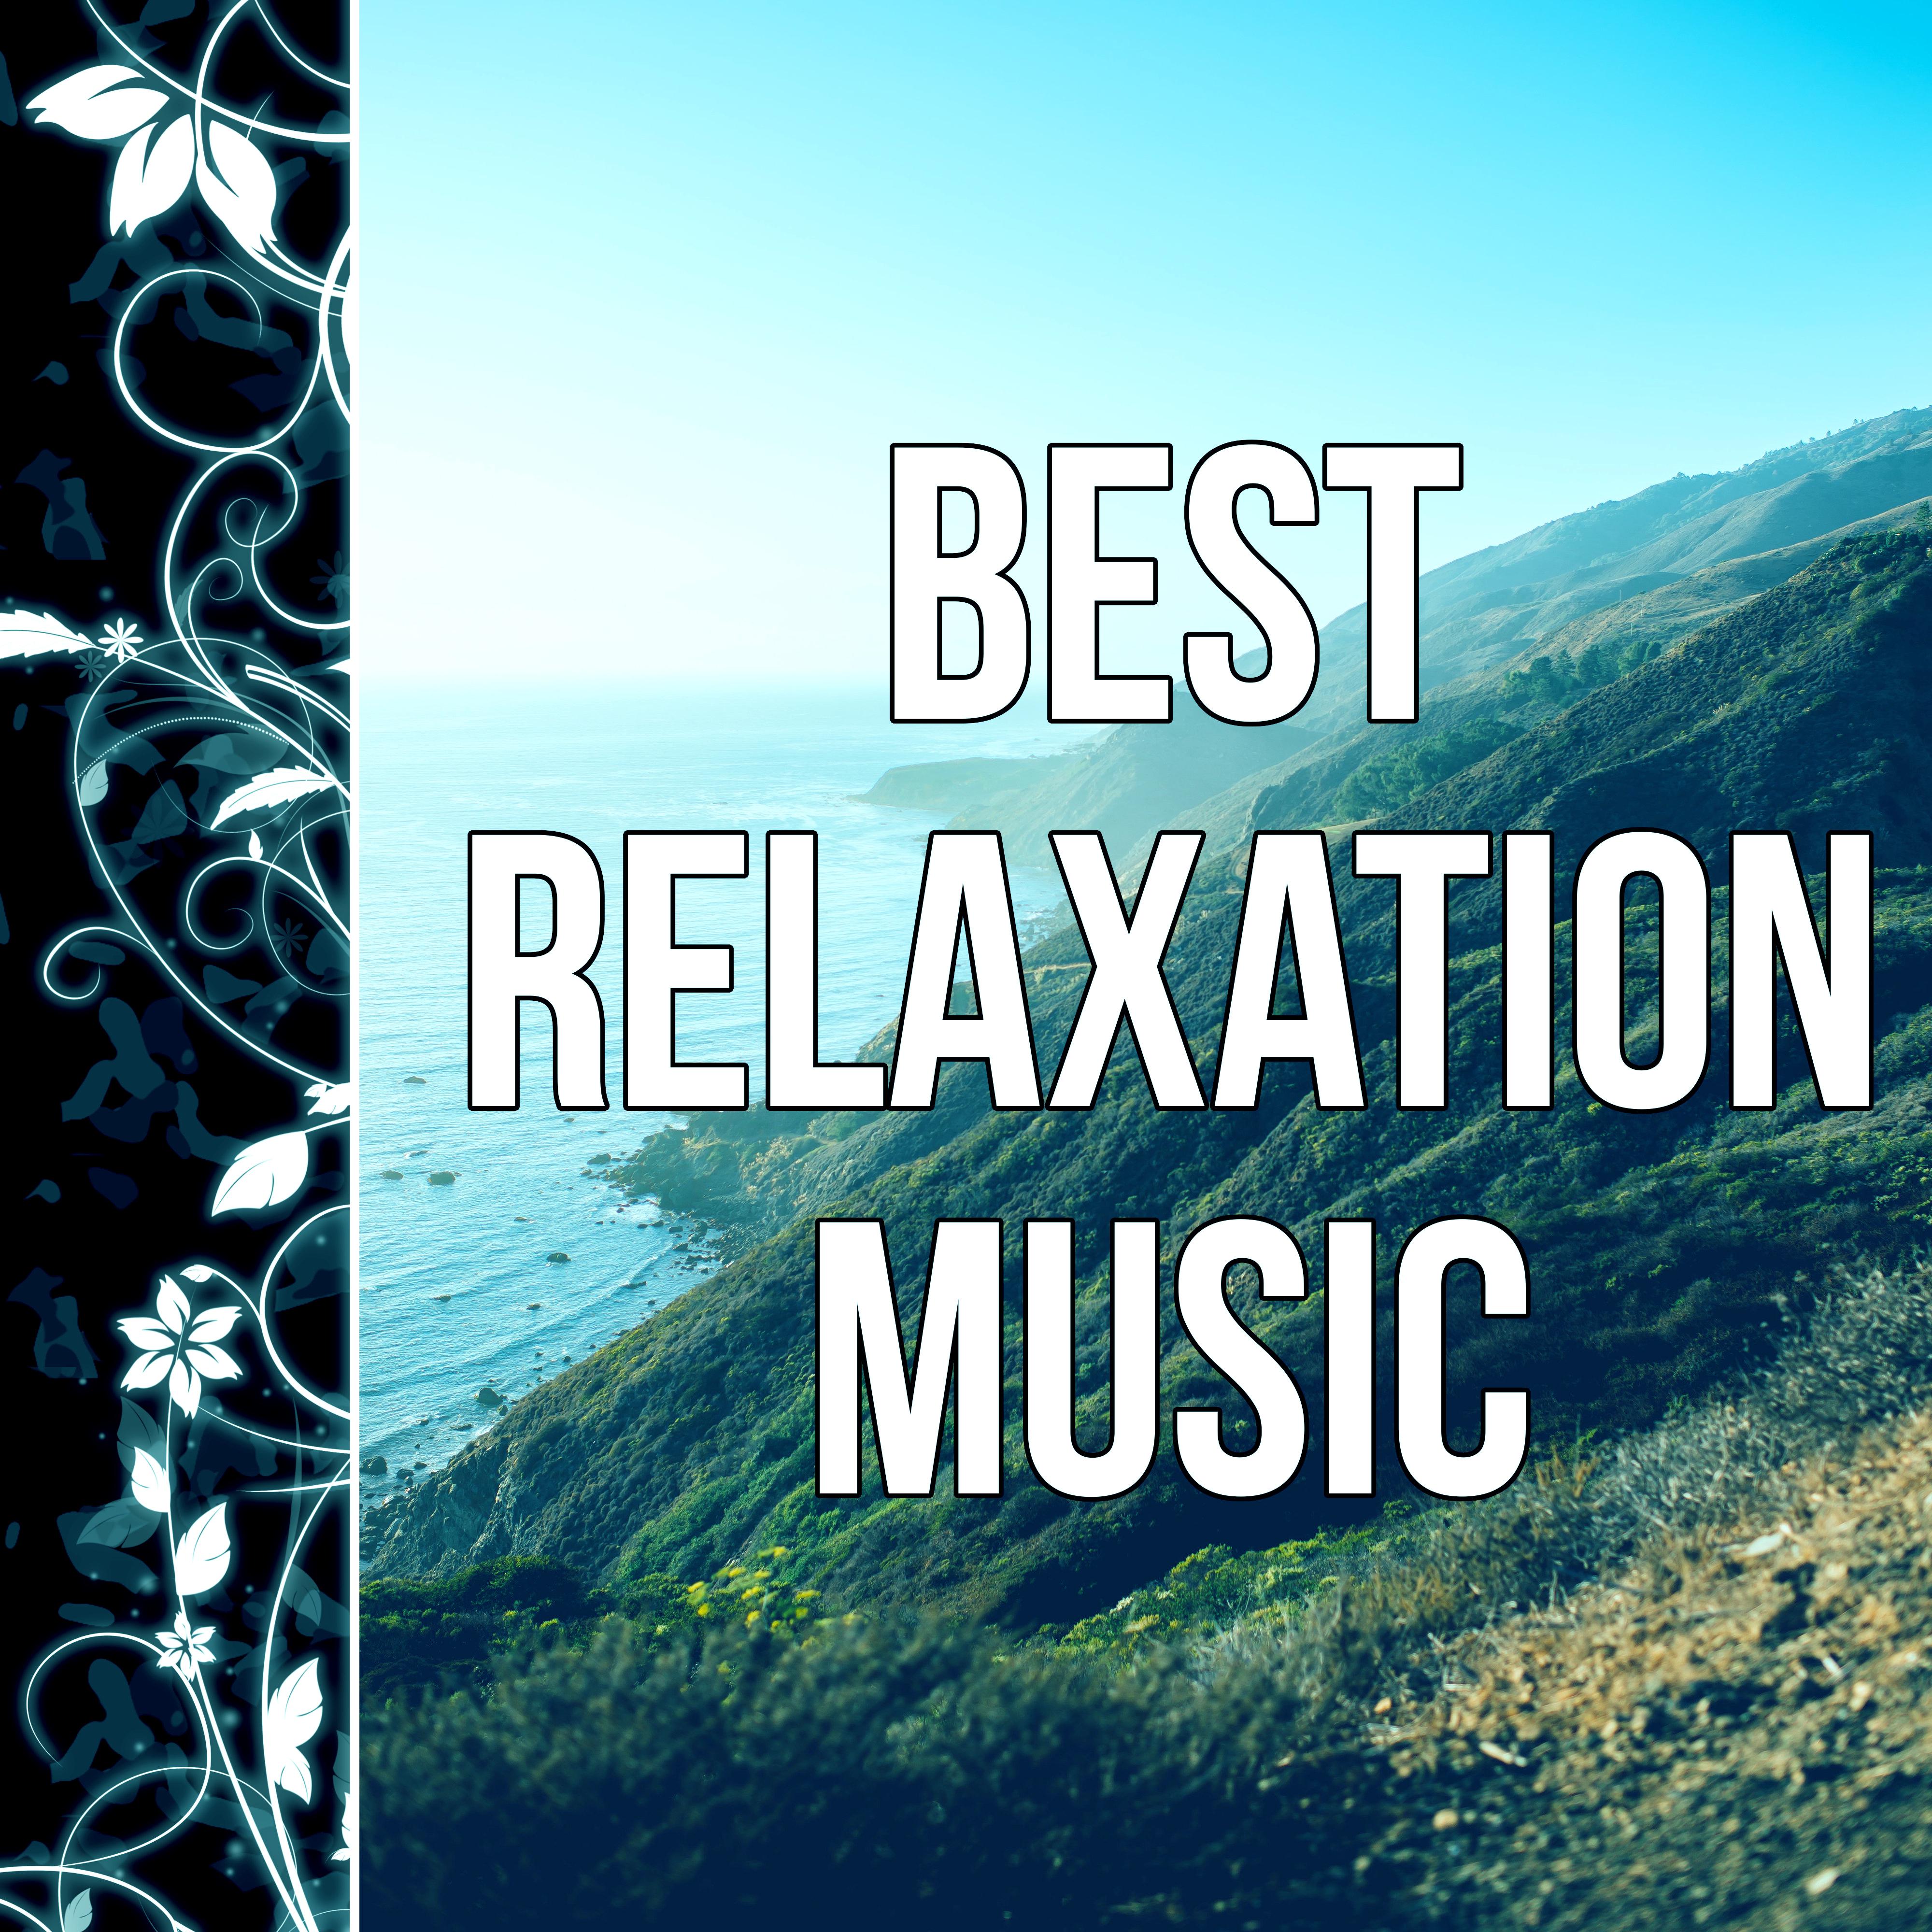 Best Relaxation Music - Music for Dreaming and Sleeping, Relaxing Piano Music for Winter, Fireplace, Music for Massage, Yoga, Soothing Sounds, Ambient Music